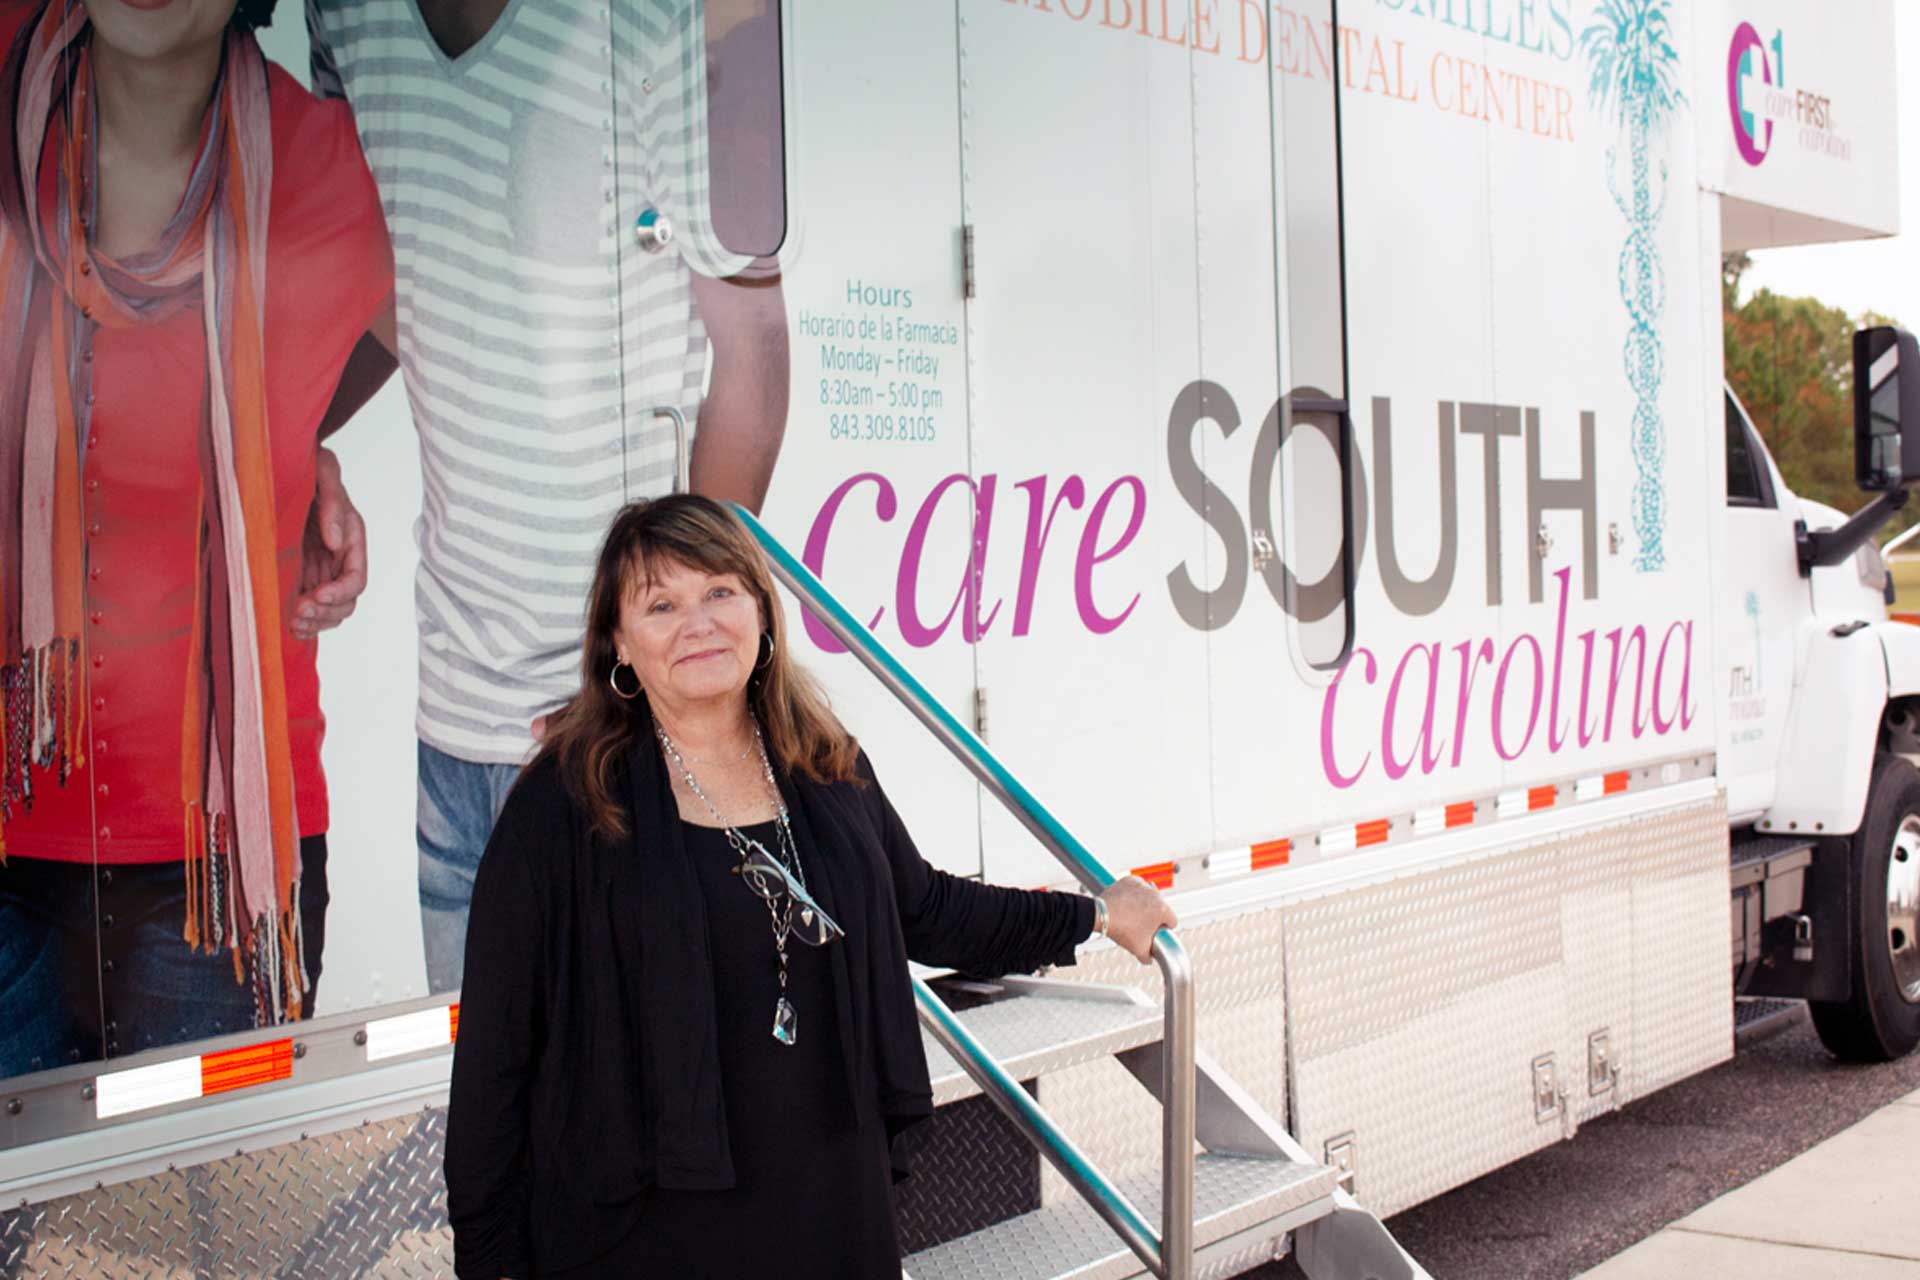 CareSouth Van out in the community and woman standing in front of van